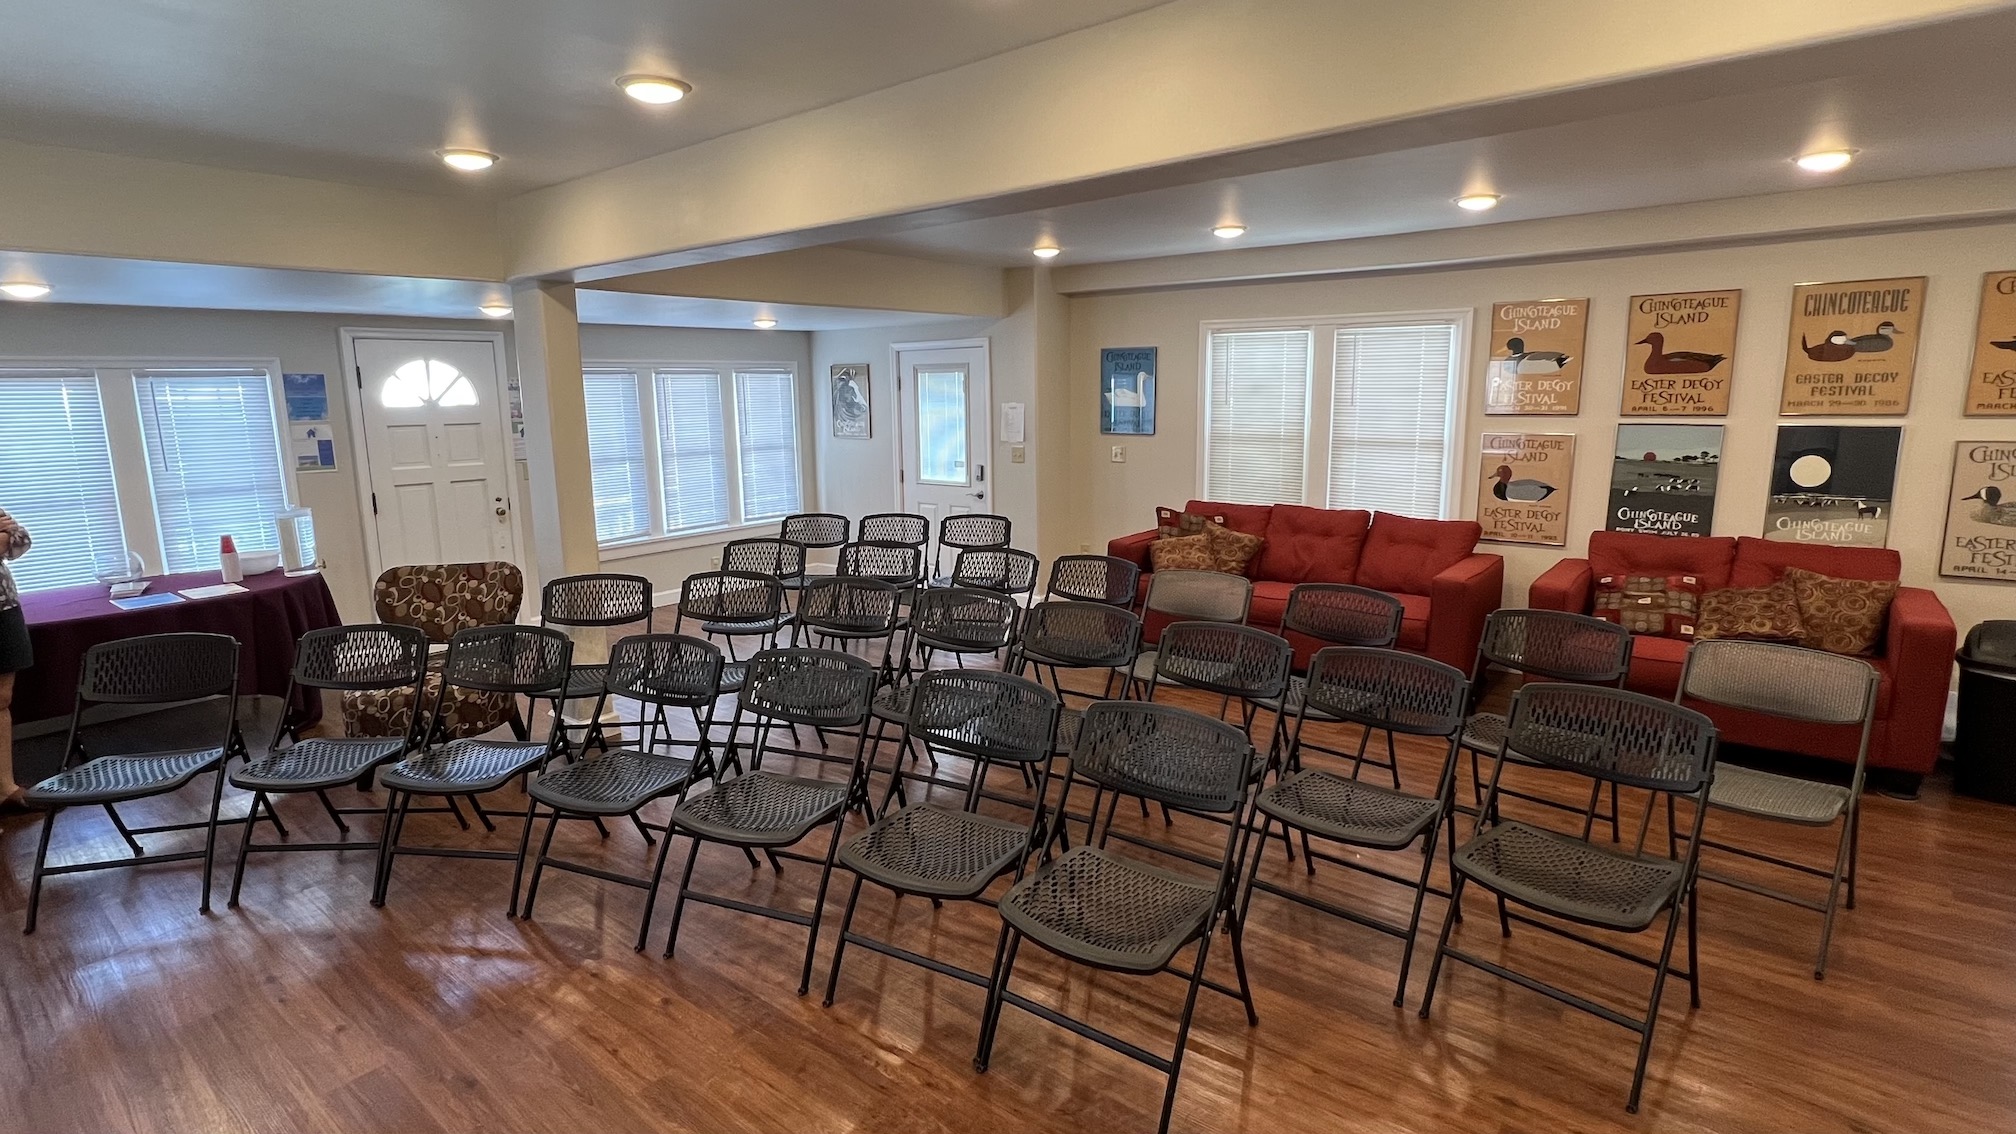 The main meeting room of the Island Community House.